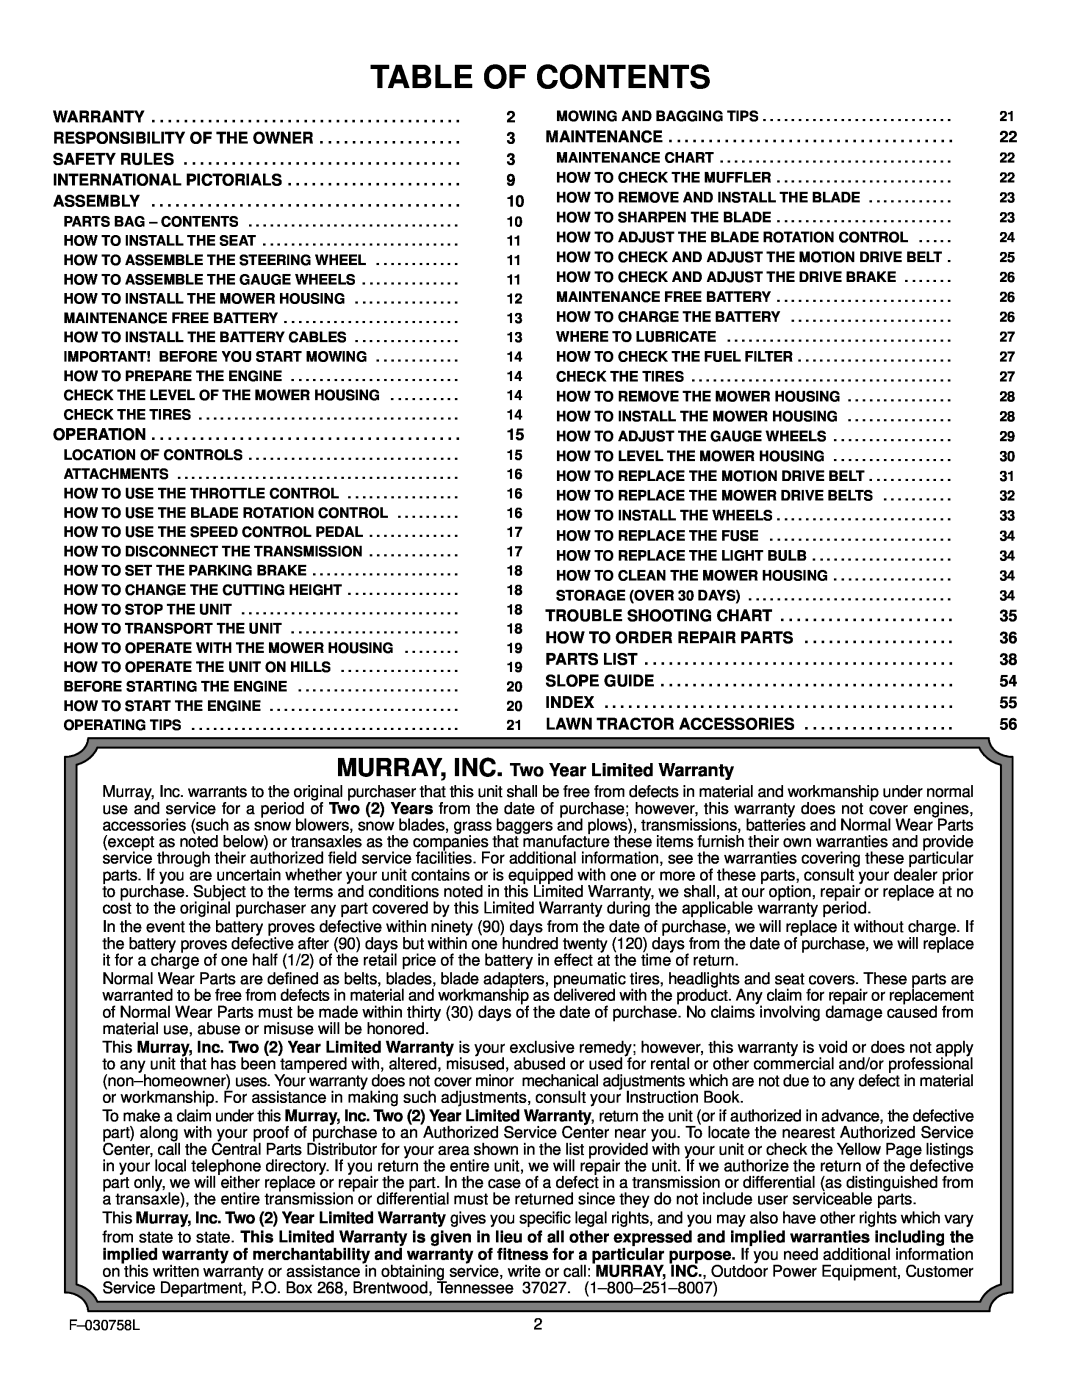 Murray 465609x24A manual Table Of Contents, MURRAY, INC. Two Year Limited Warranty 